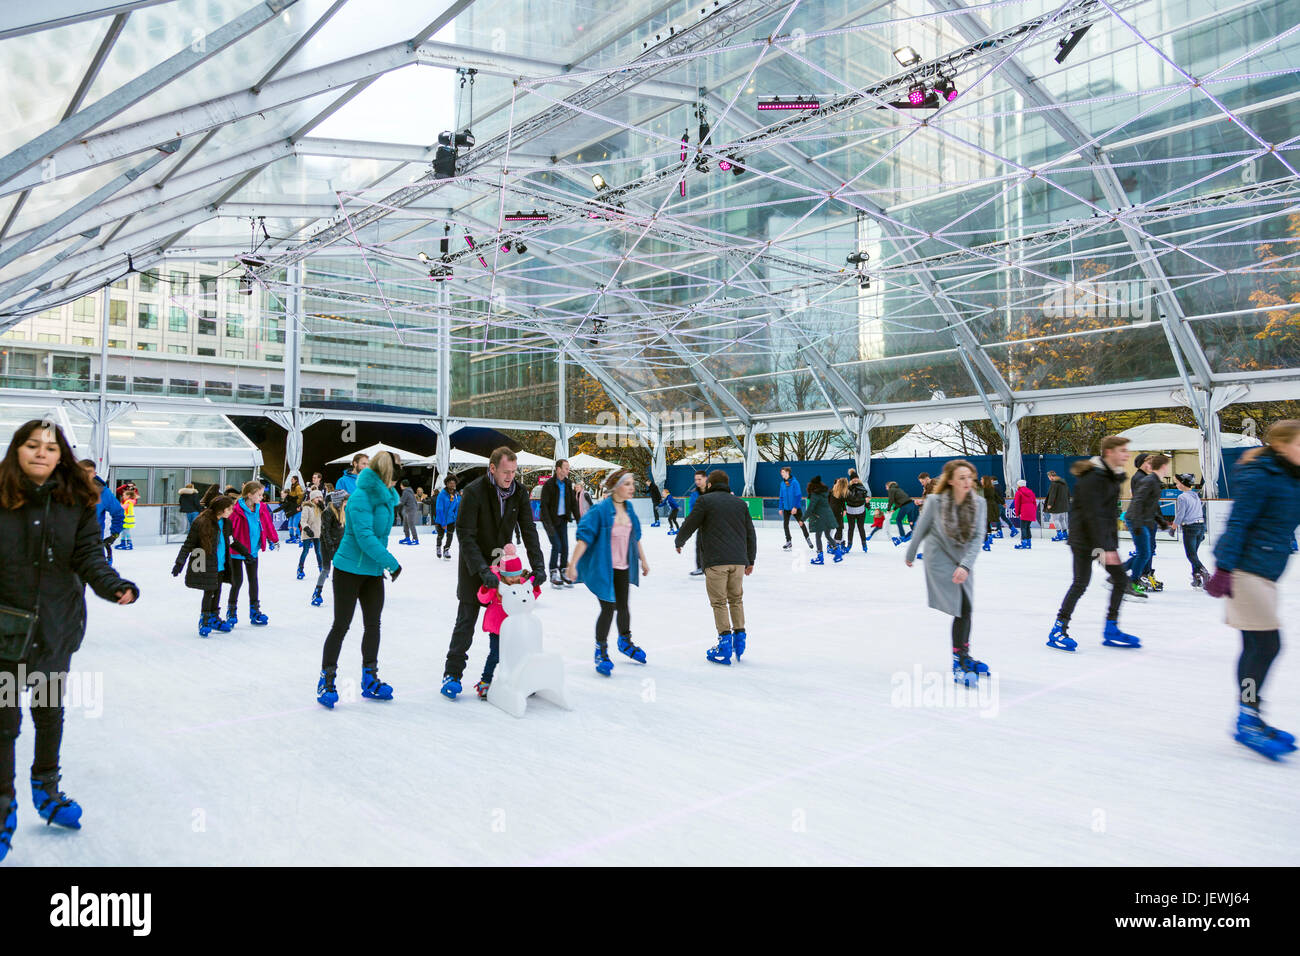 People ice skating on an ice rink in Canary Wharf, London, UK Stock Photo